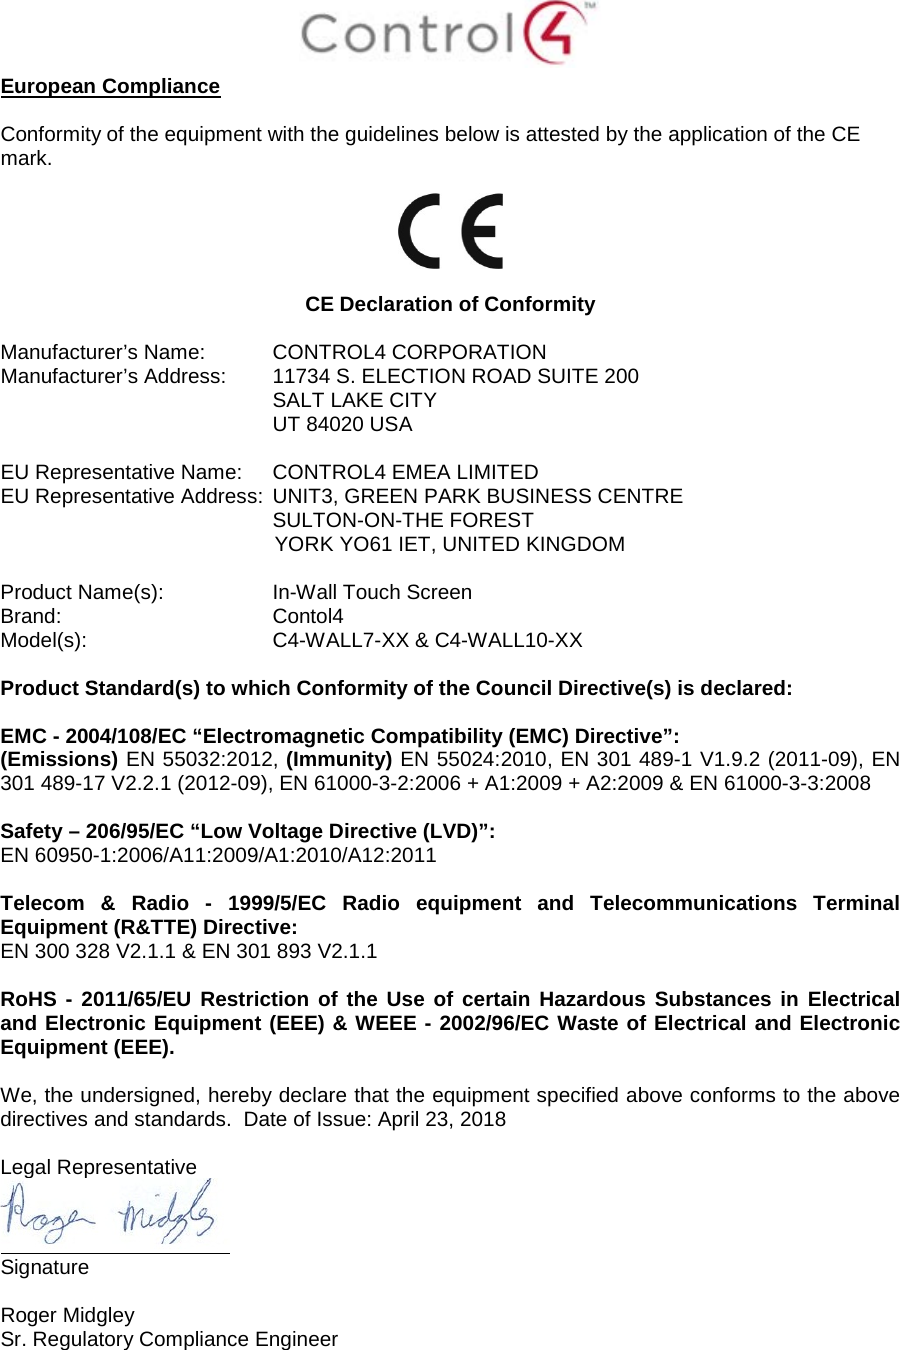 European Compliance Conformity of the equipment with the guidelines below is attested by the application of the CE mark. CE Declaration of Conformity Manufacturer’s Name: CONTROL4 CORPORATION  Manufacturer’s Address:  11734 S. ELECTION ROAD SUITE 200 SALT LAKE CITY  UT 84020 USA  EU Representative Name: CONTROL4 EMEA LIMITED EU Representative Address: UNIT3, GREEN PARK BUSINESS CENTRE SULTON-ON-THE FOREST YORK YO61 IET, UNITED KINGDOM Product Name(s):  In-Wall Touch Screen  Brand: Contol4     Model(s): C4-WALL7-XX &amp; C4-WALL10-XX Product Standard(s) to which Conformity of the Council Directive(s) is declared: EMC - 2004/108/EC “Electromagnetic Compatibility (EMC) Directive”: (Emissions) EN 55032:2012, (Immunity) EN 55024:2010, EN 301 489-1 V1.9.2 (2011-09), EN 301 489-17 V2.2.1 (2012-09), EN 61000-3-2:2006 + A1:2009 + A2:2009 &amp; EN 61000-3-3:2008 Safety – 206/95/EC “Low Voltage Directive (LVD)”: EN 60950-1:2006/A11:2009/A1:2010/A12:2011  Telecom &amp; Radio -  1999/5/EC Radio equipment and Telecommunications Terminal Equipment (R&amp;TTE) Directive: EN 300 328 V2.1.1 &amp; EN 301 893 V2.1.1 RoHS - 2011/65/EU Restriction of the Use of certain Hazardous Substances in Electrical and Electronic Equipment (EEE) &amp; WEEE - 2002/96/EC Waste of Electrical and Electronic Equipment (EEE). We, the undersigned, hereby declare that the equipment specified above conforms to the above directives and standards.  Date of Issue: April 23, 2018 Legal Representative Signature Roger Midgley  Sr. Regulatory Compliance Engineer 